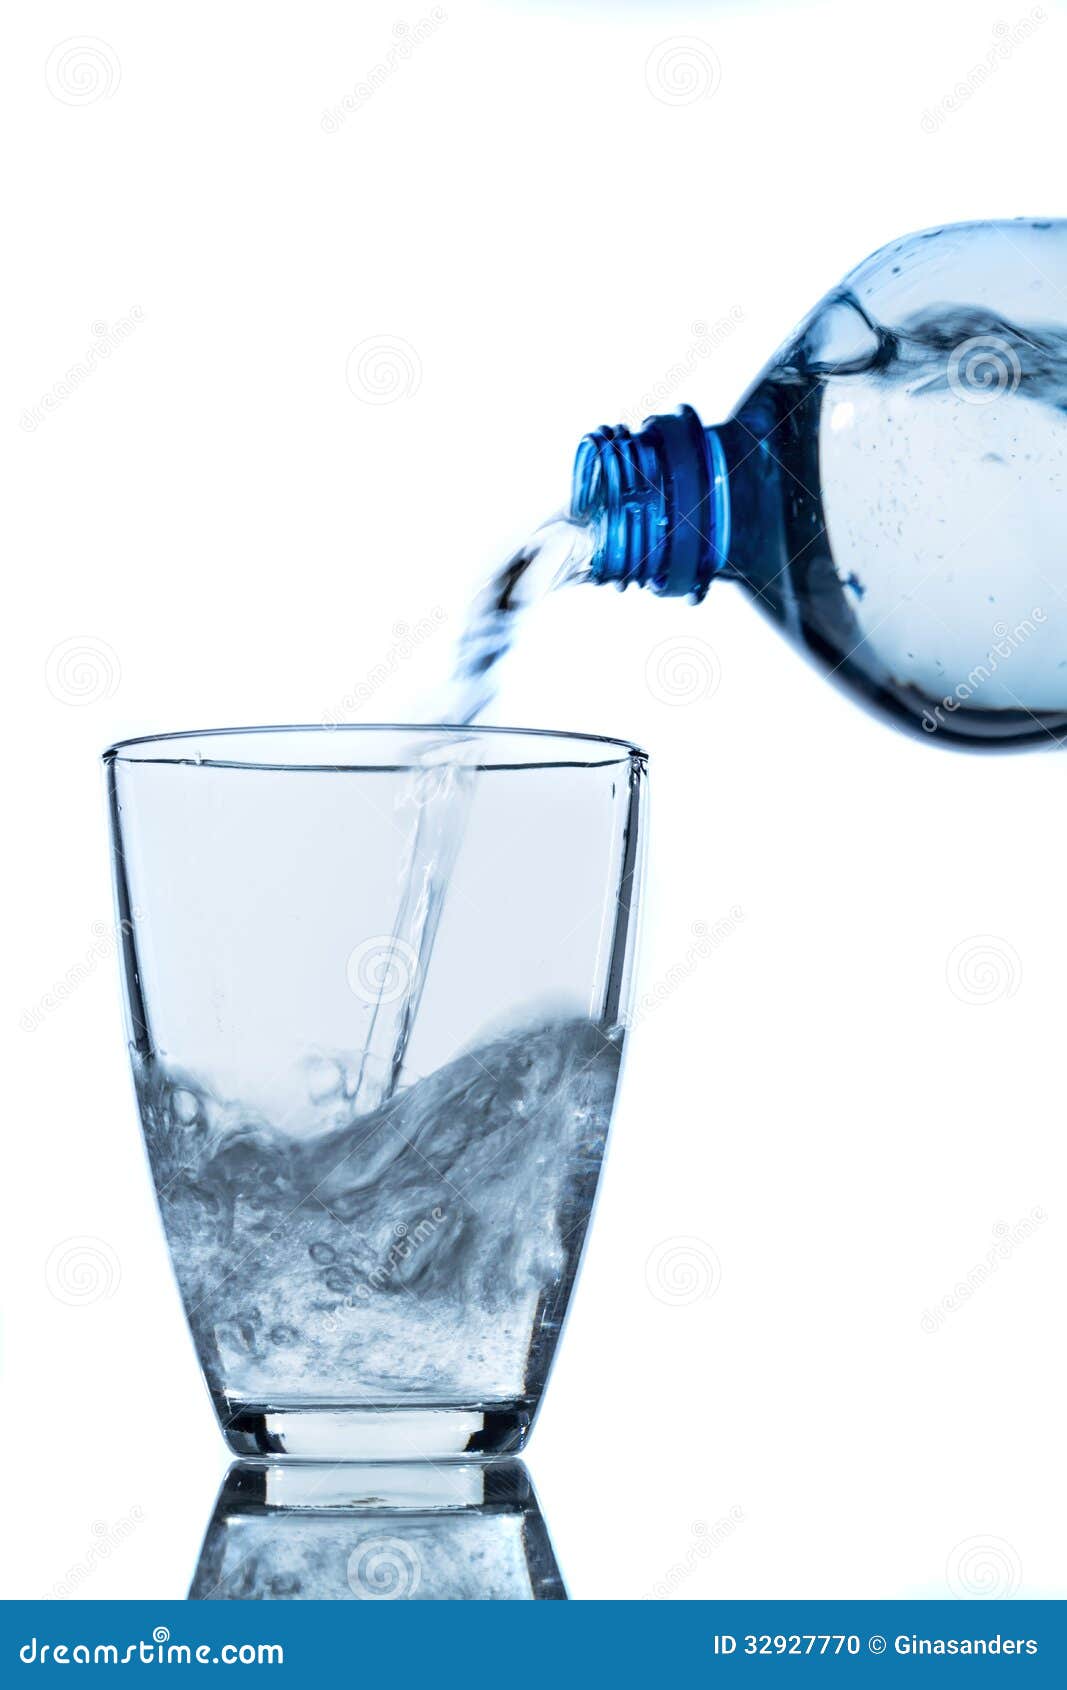 Pour water into a glass stock photo. Image of water